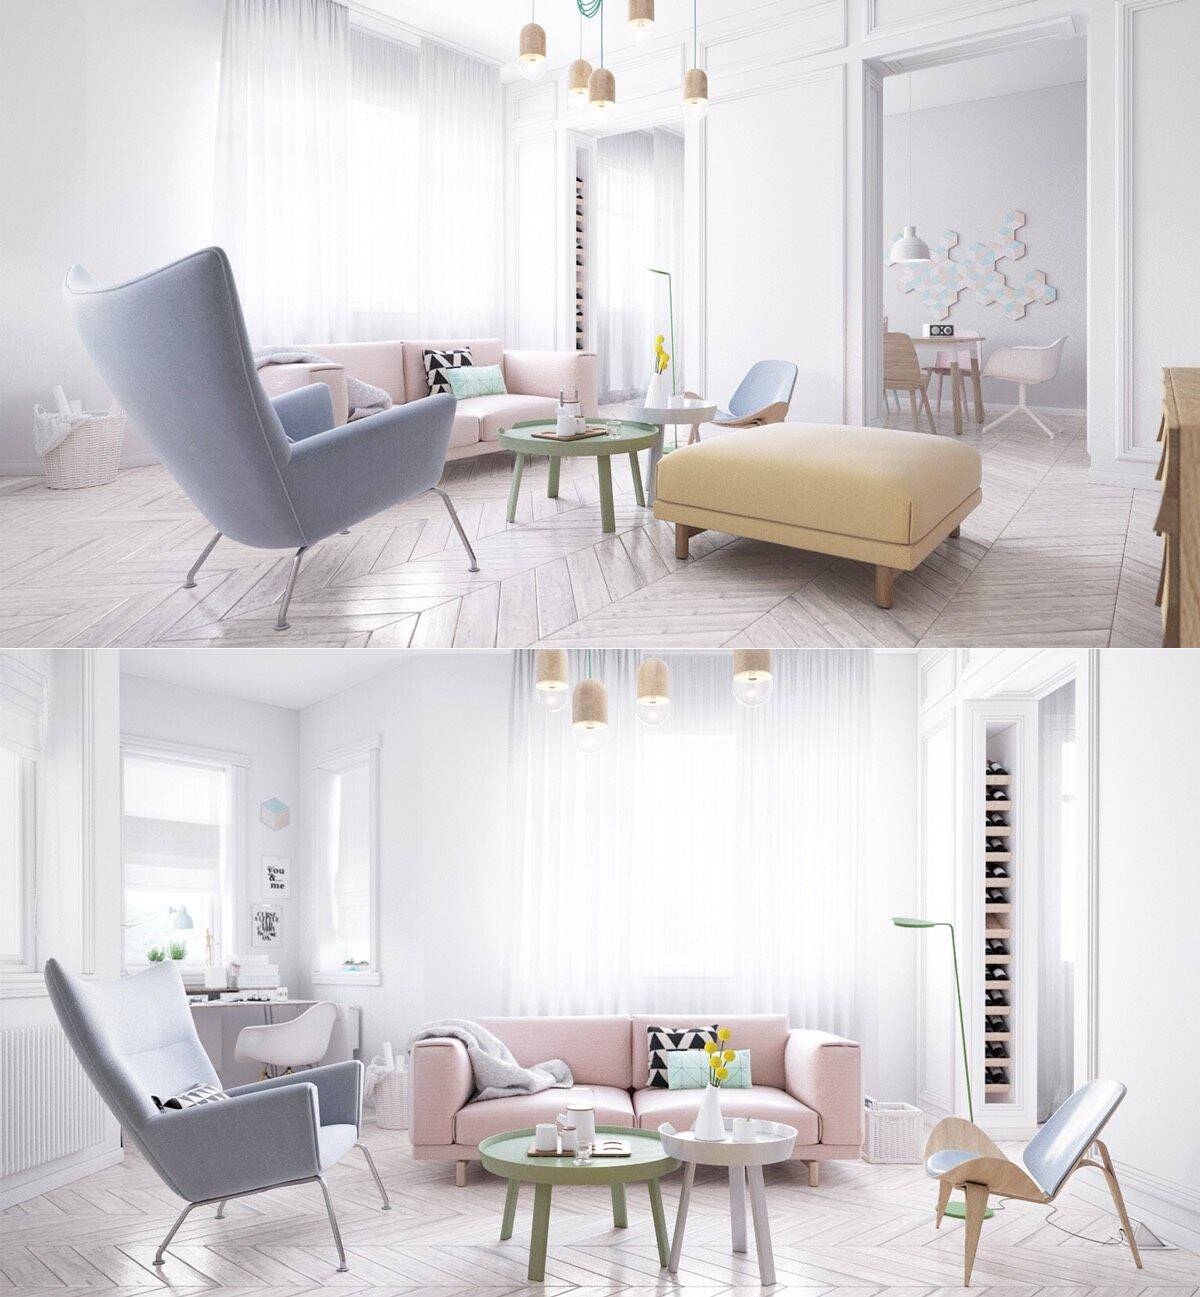 You may think that Scandinavian living room is mostly in white and grey, but it’s not really true. So sweet pastel colors like these also bring a different sophistication to the space